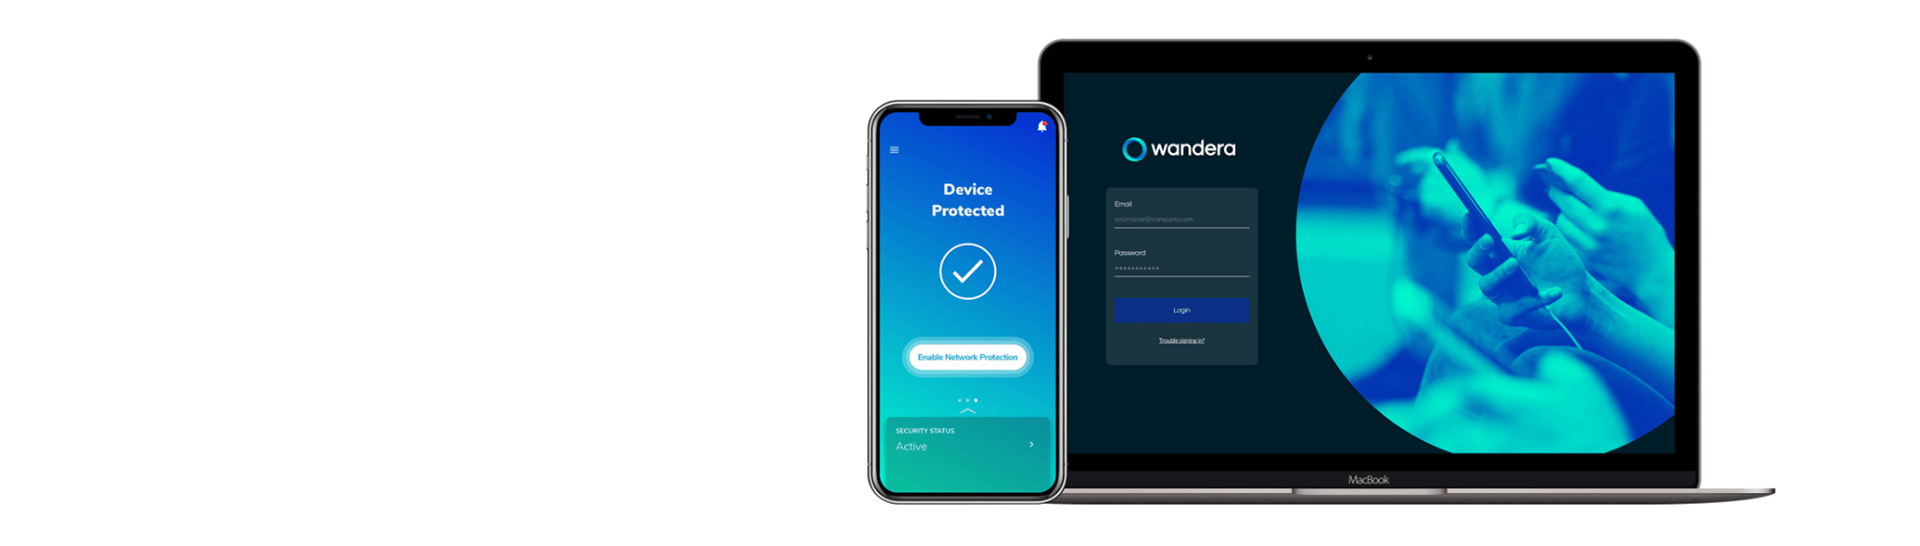 Wandera Mobile Security licensing included resized